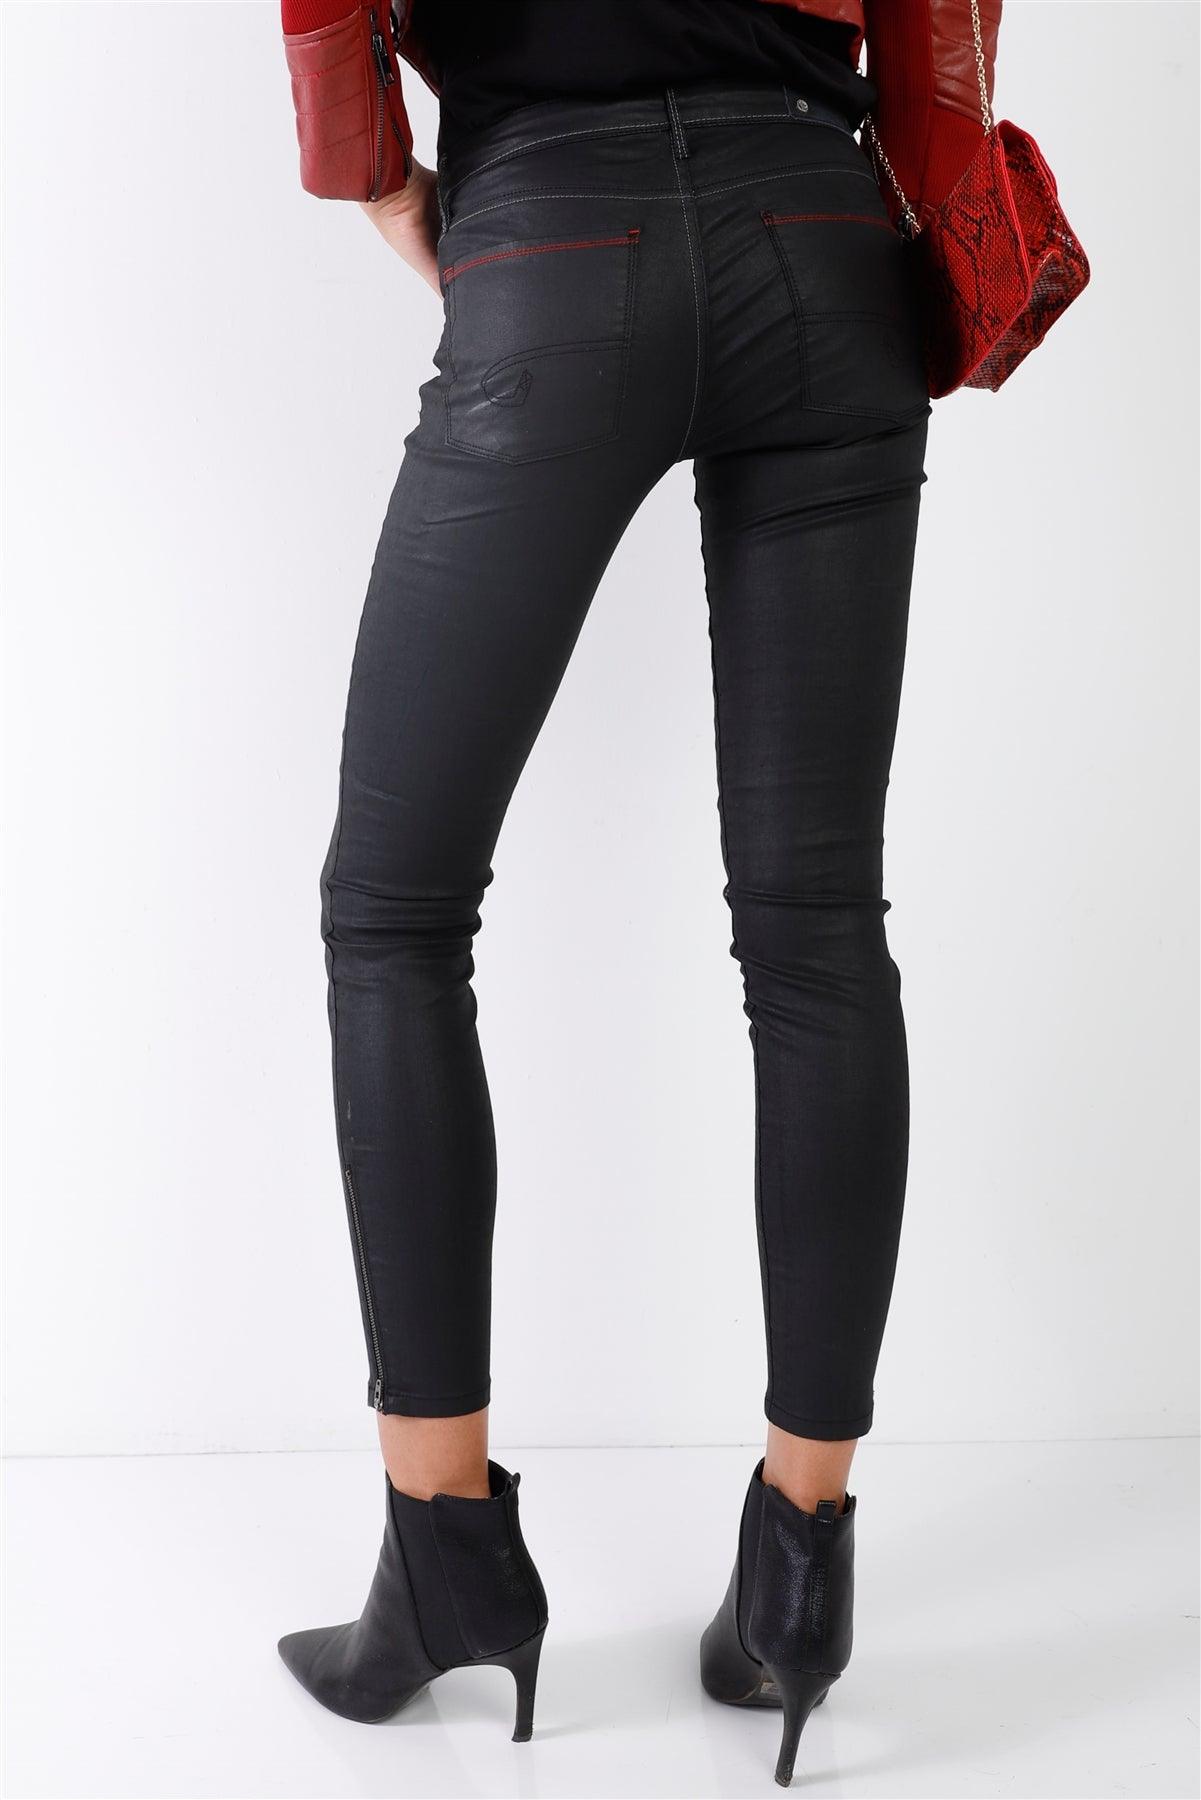 David Bitton Black Glossy Coated Contrast White & Red Thread Stitch Low Rise Skinny Jeans